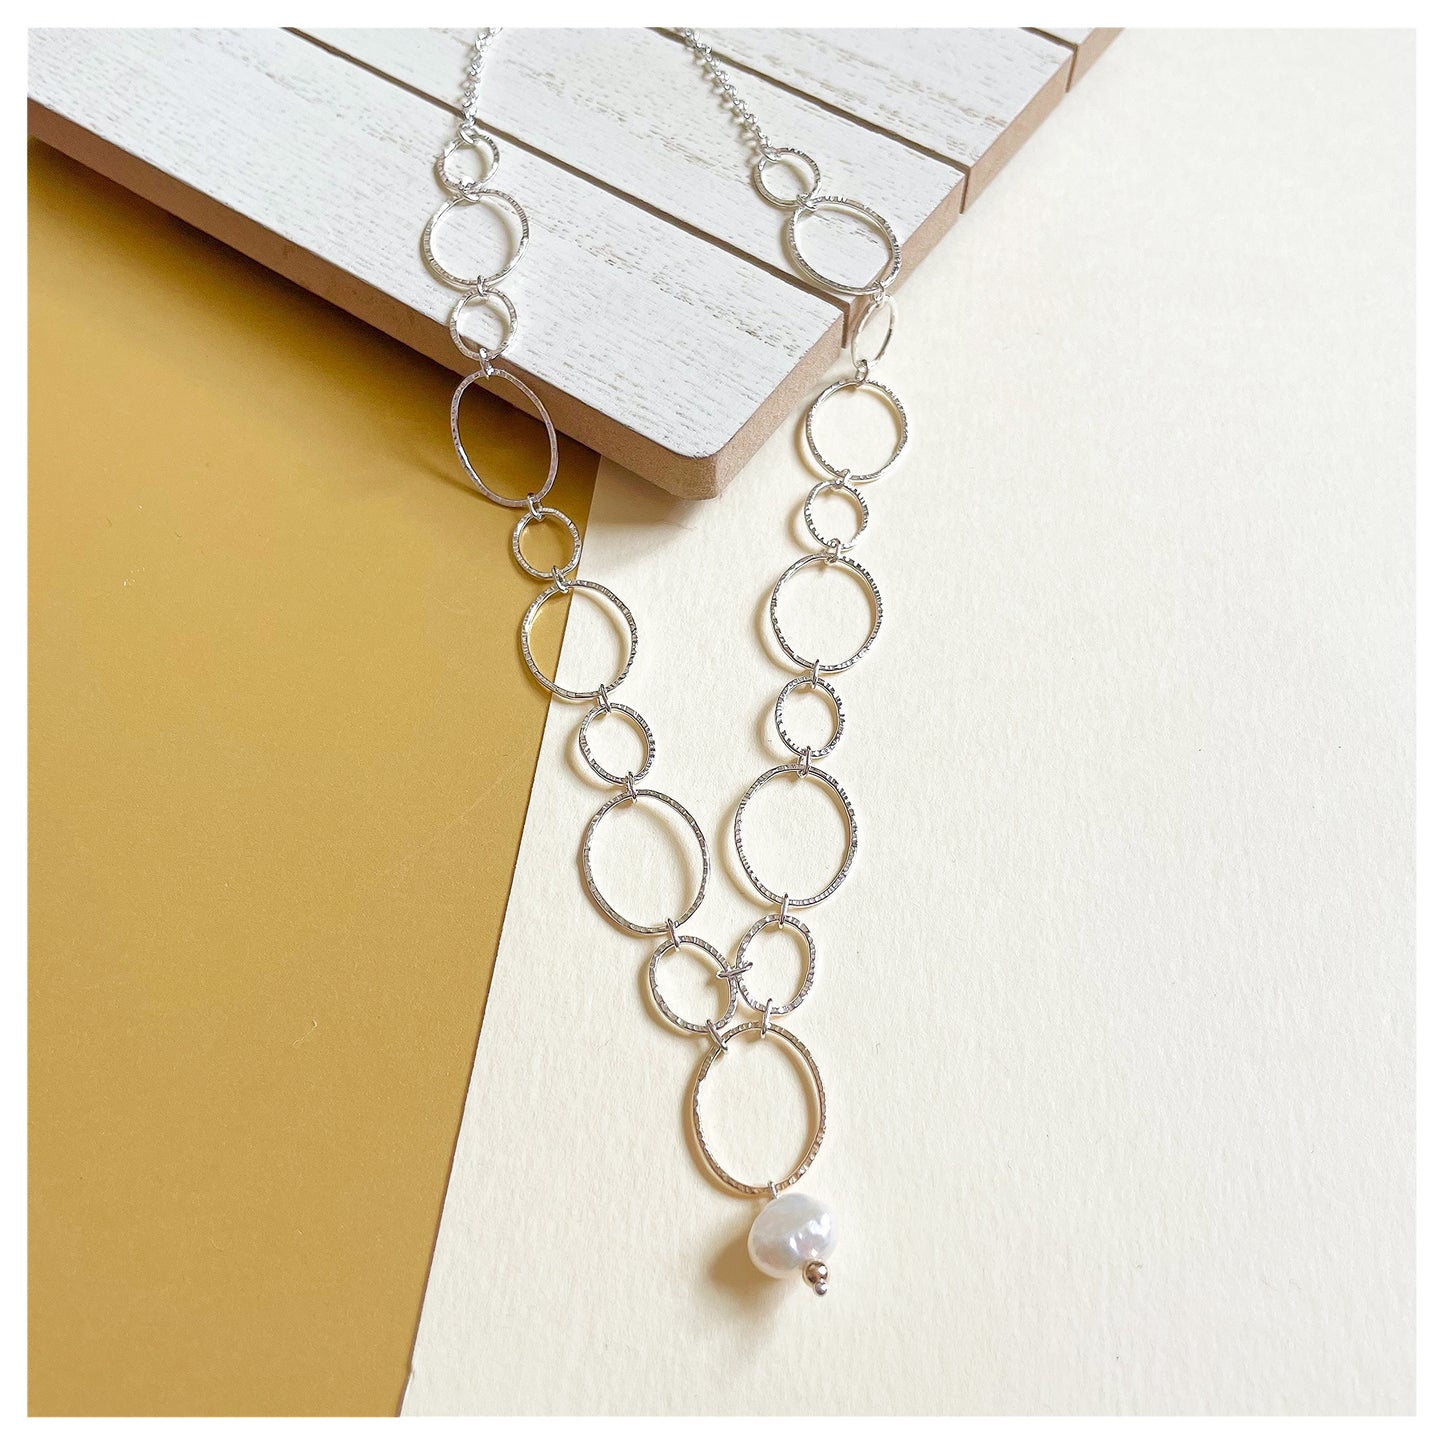 9ct Yellow Gold, Sterling Silver and Freshwater Pearl Oval Link Handmade Chain.